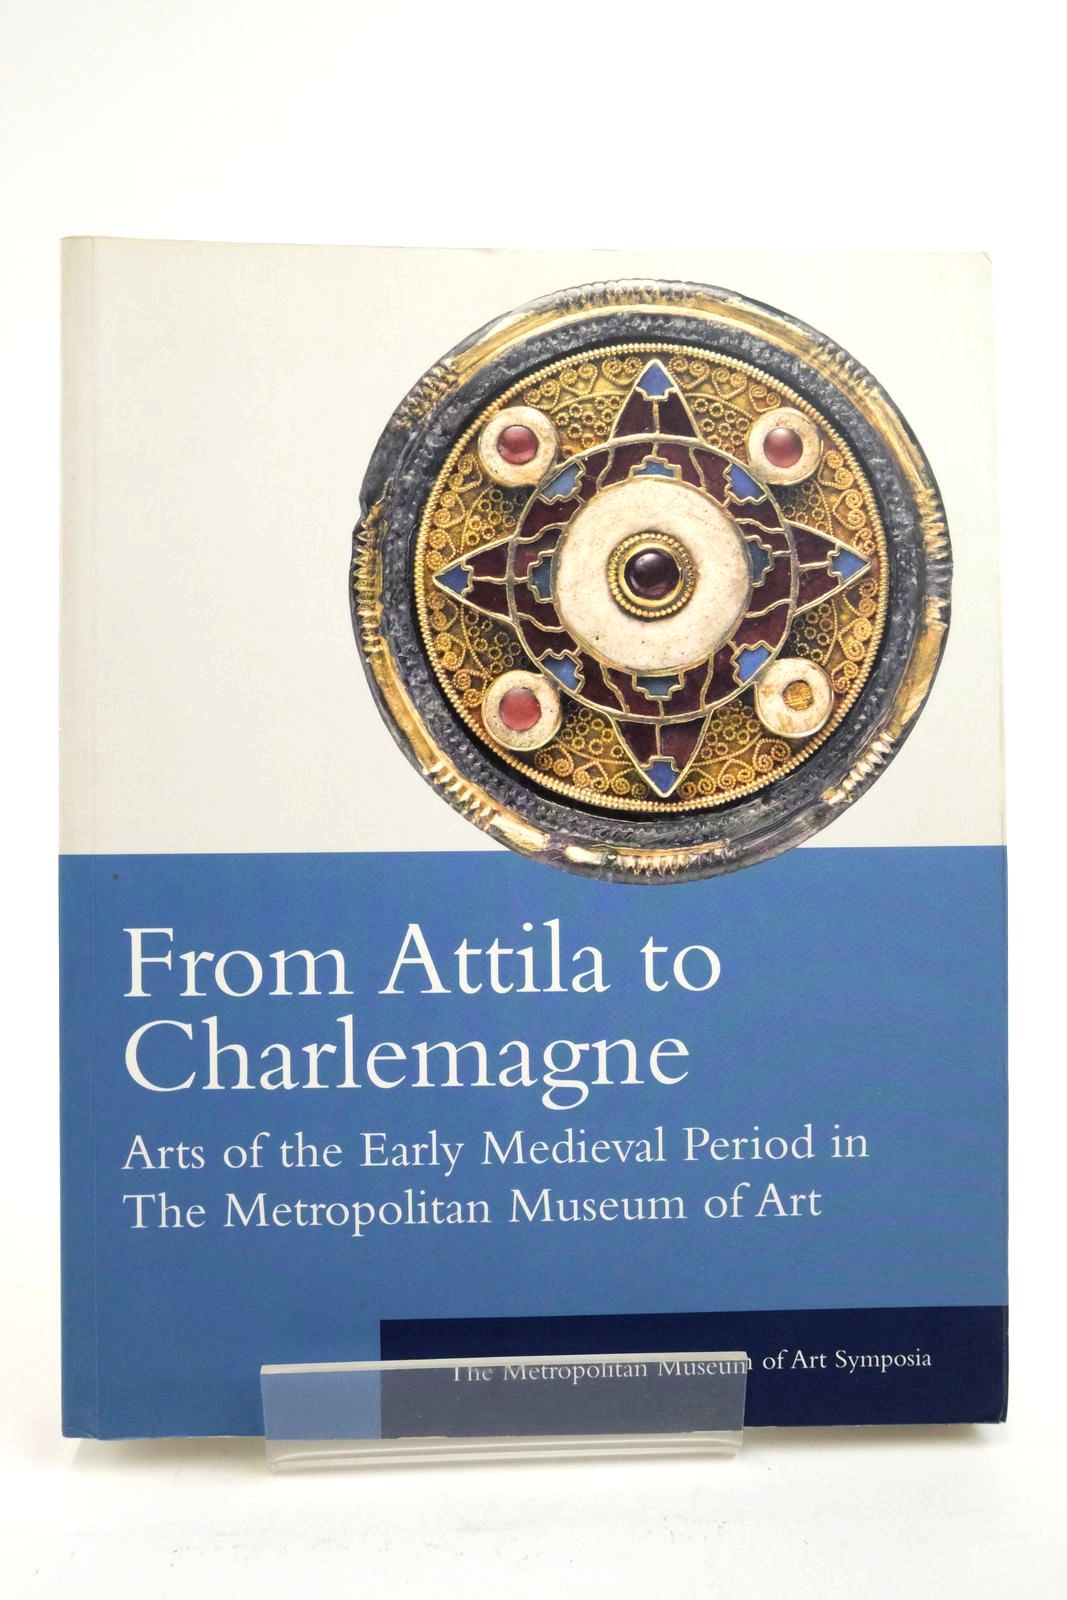 Photo of FROM ATTILA TO CHARLEMAGNE written by Brown, Katharine Reynolds Kidd, Dafydd Little, Charles T. published by The Metropolitan Museum of Art, Yale University Press (STOCK CODE: 2138941)  for sale by Stella & Rose's Books